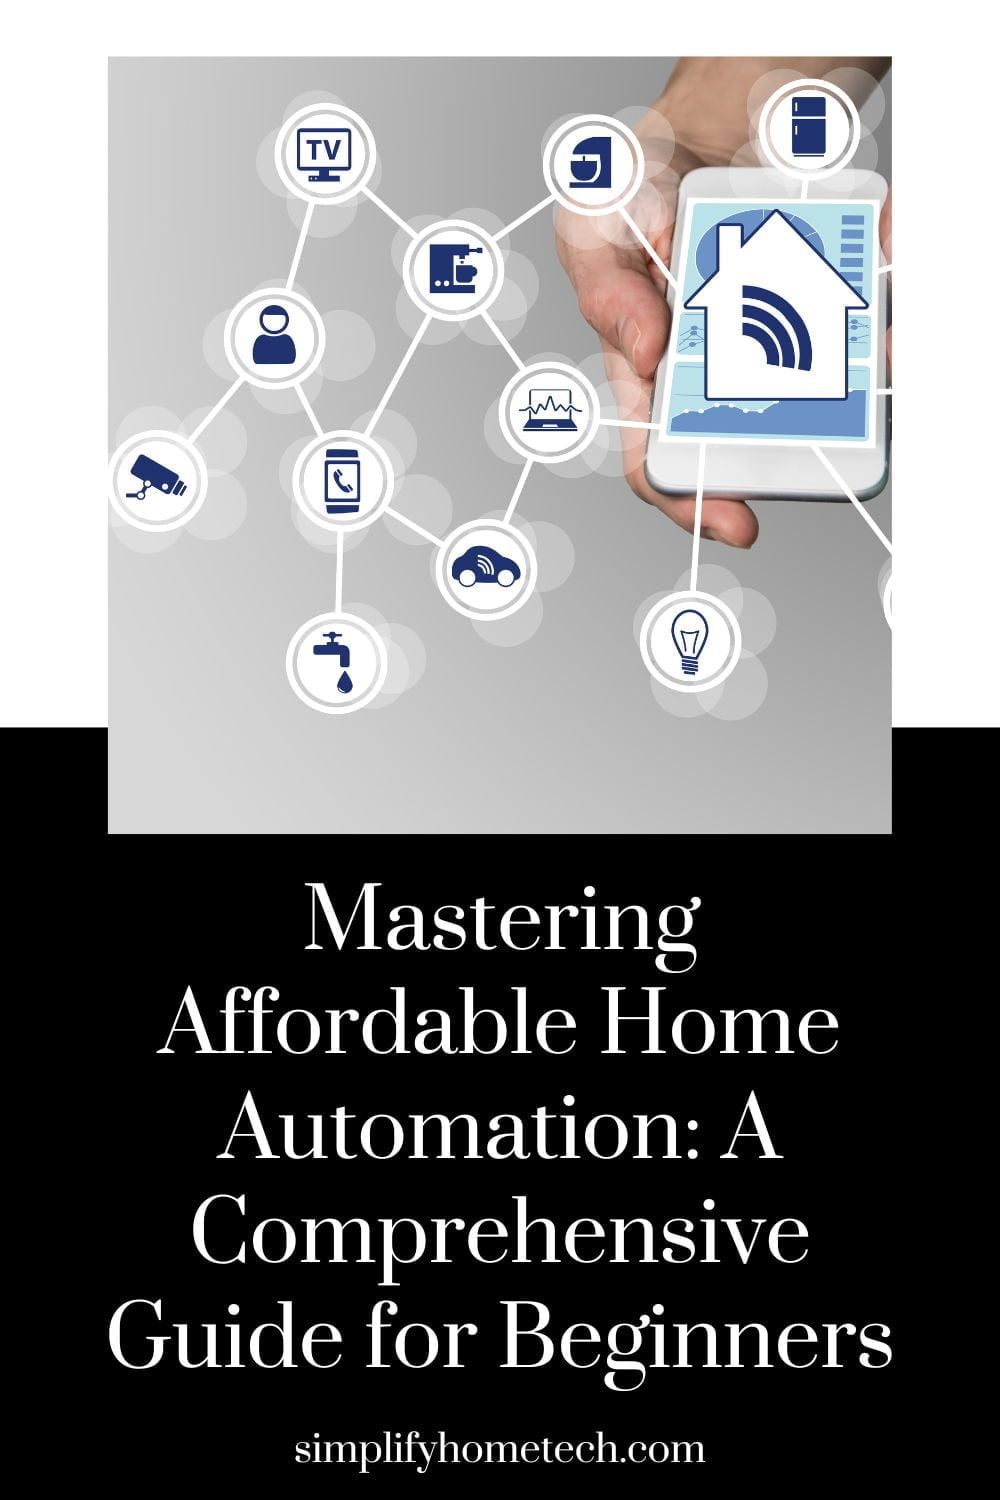 Mastering Affordable Home Automation: A Comprehensive Guide for Beginners